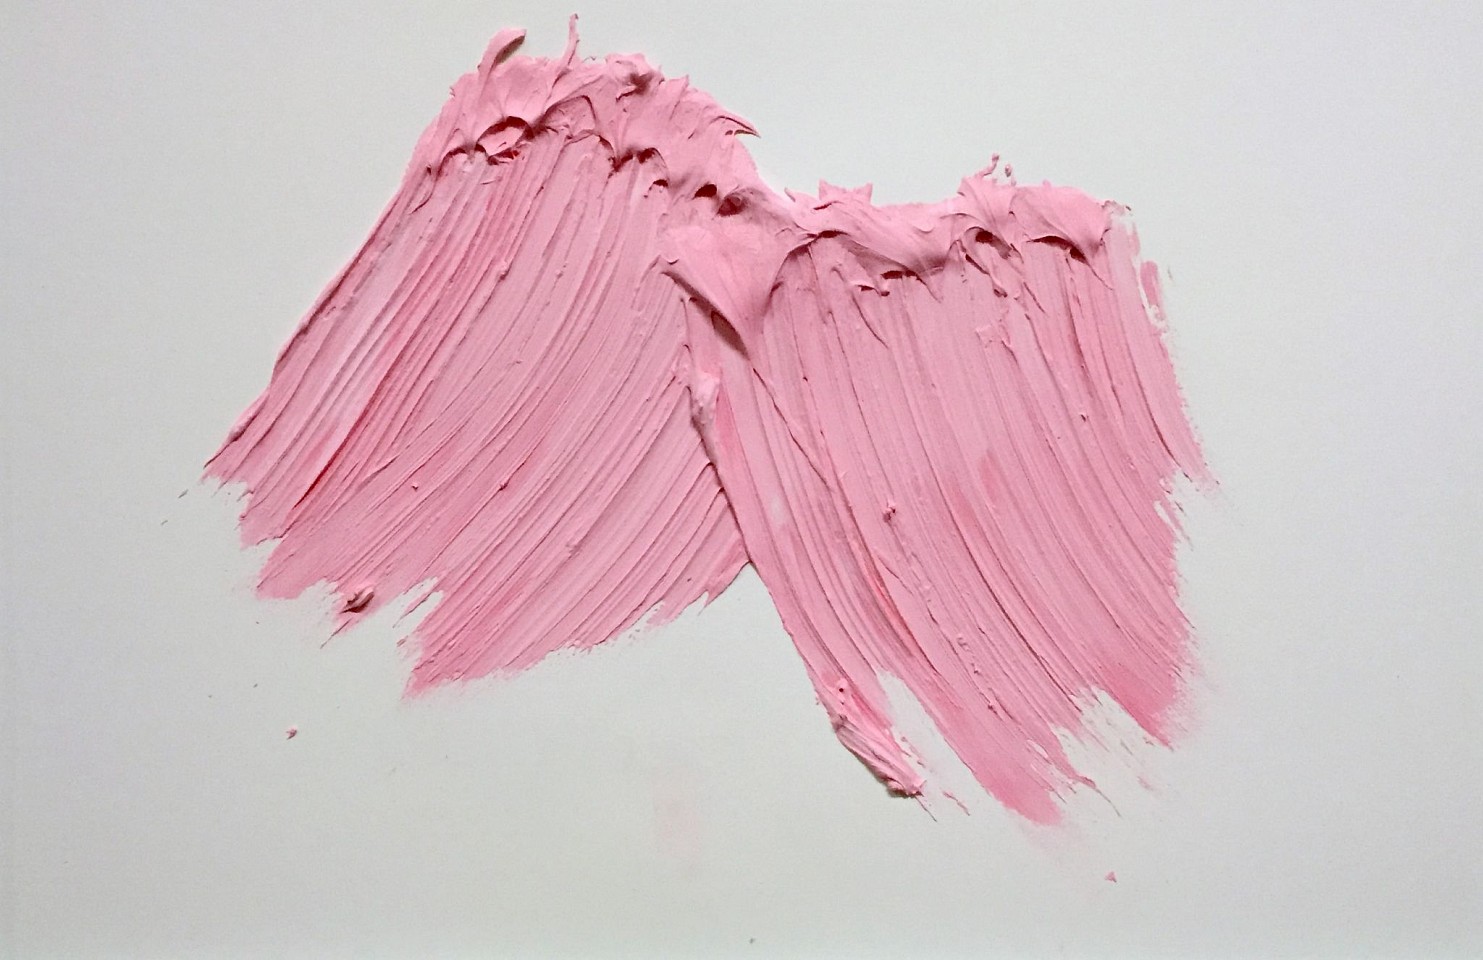 Donald Martiny, Untitled, 2017
polymer and pigment on paper, 29 1/2 x 37 1/2 in. (74.9 x 95.3 cm)
pink
MART0046